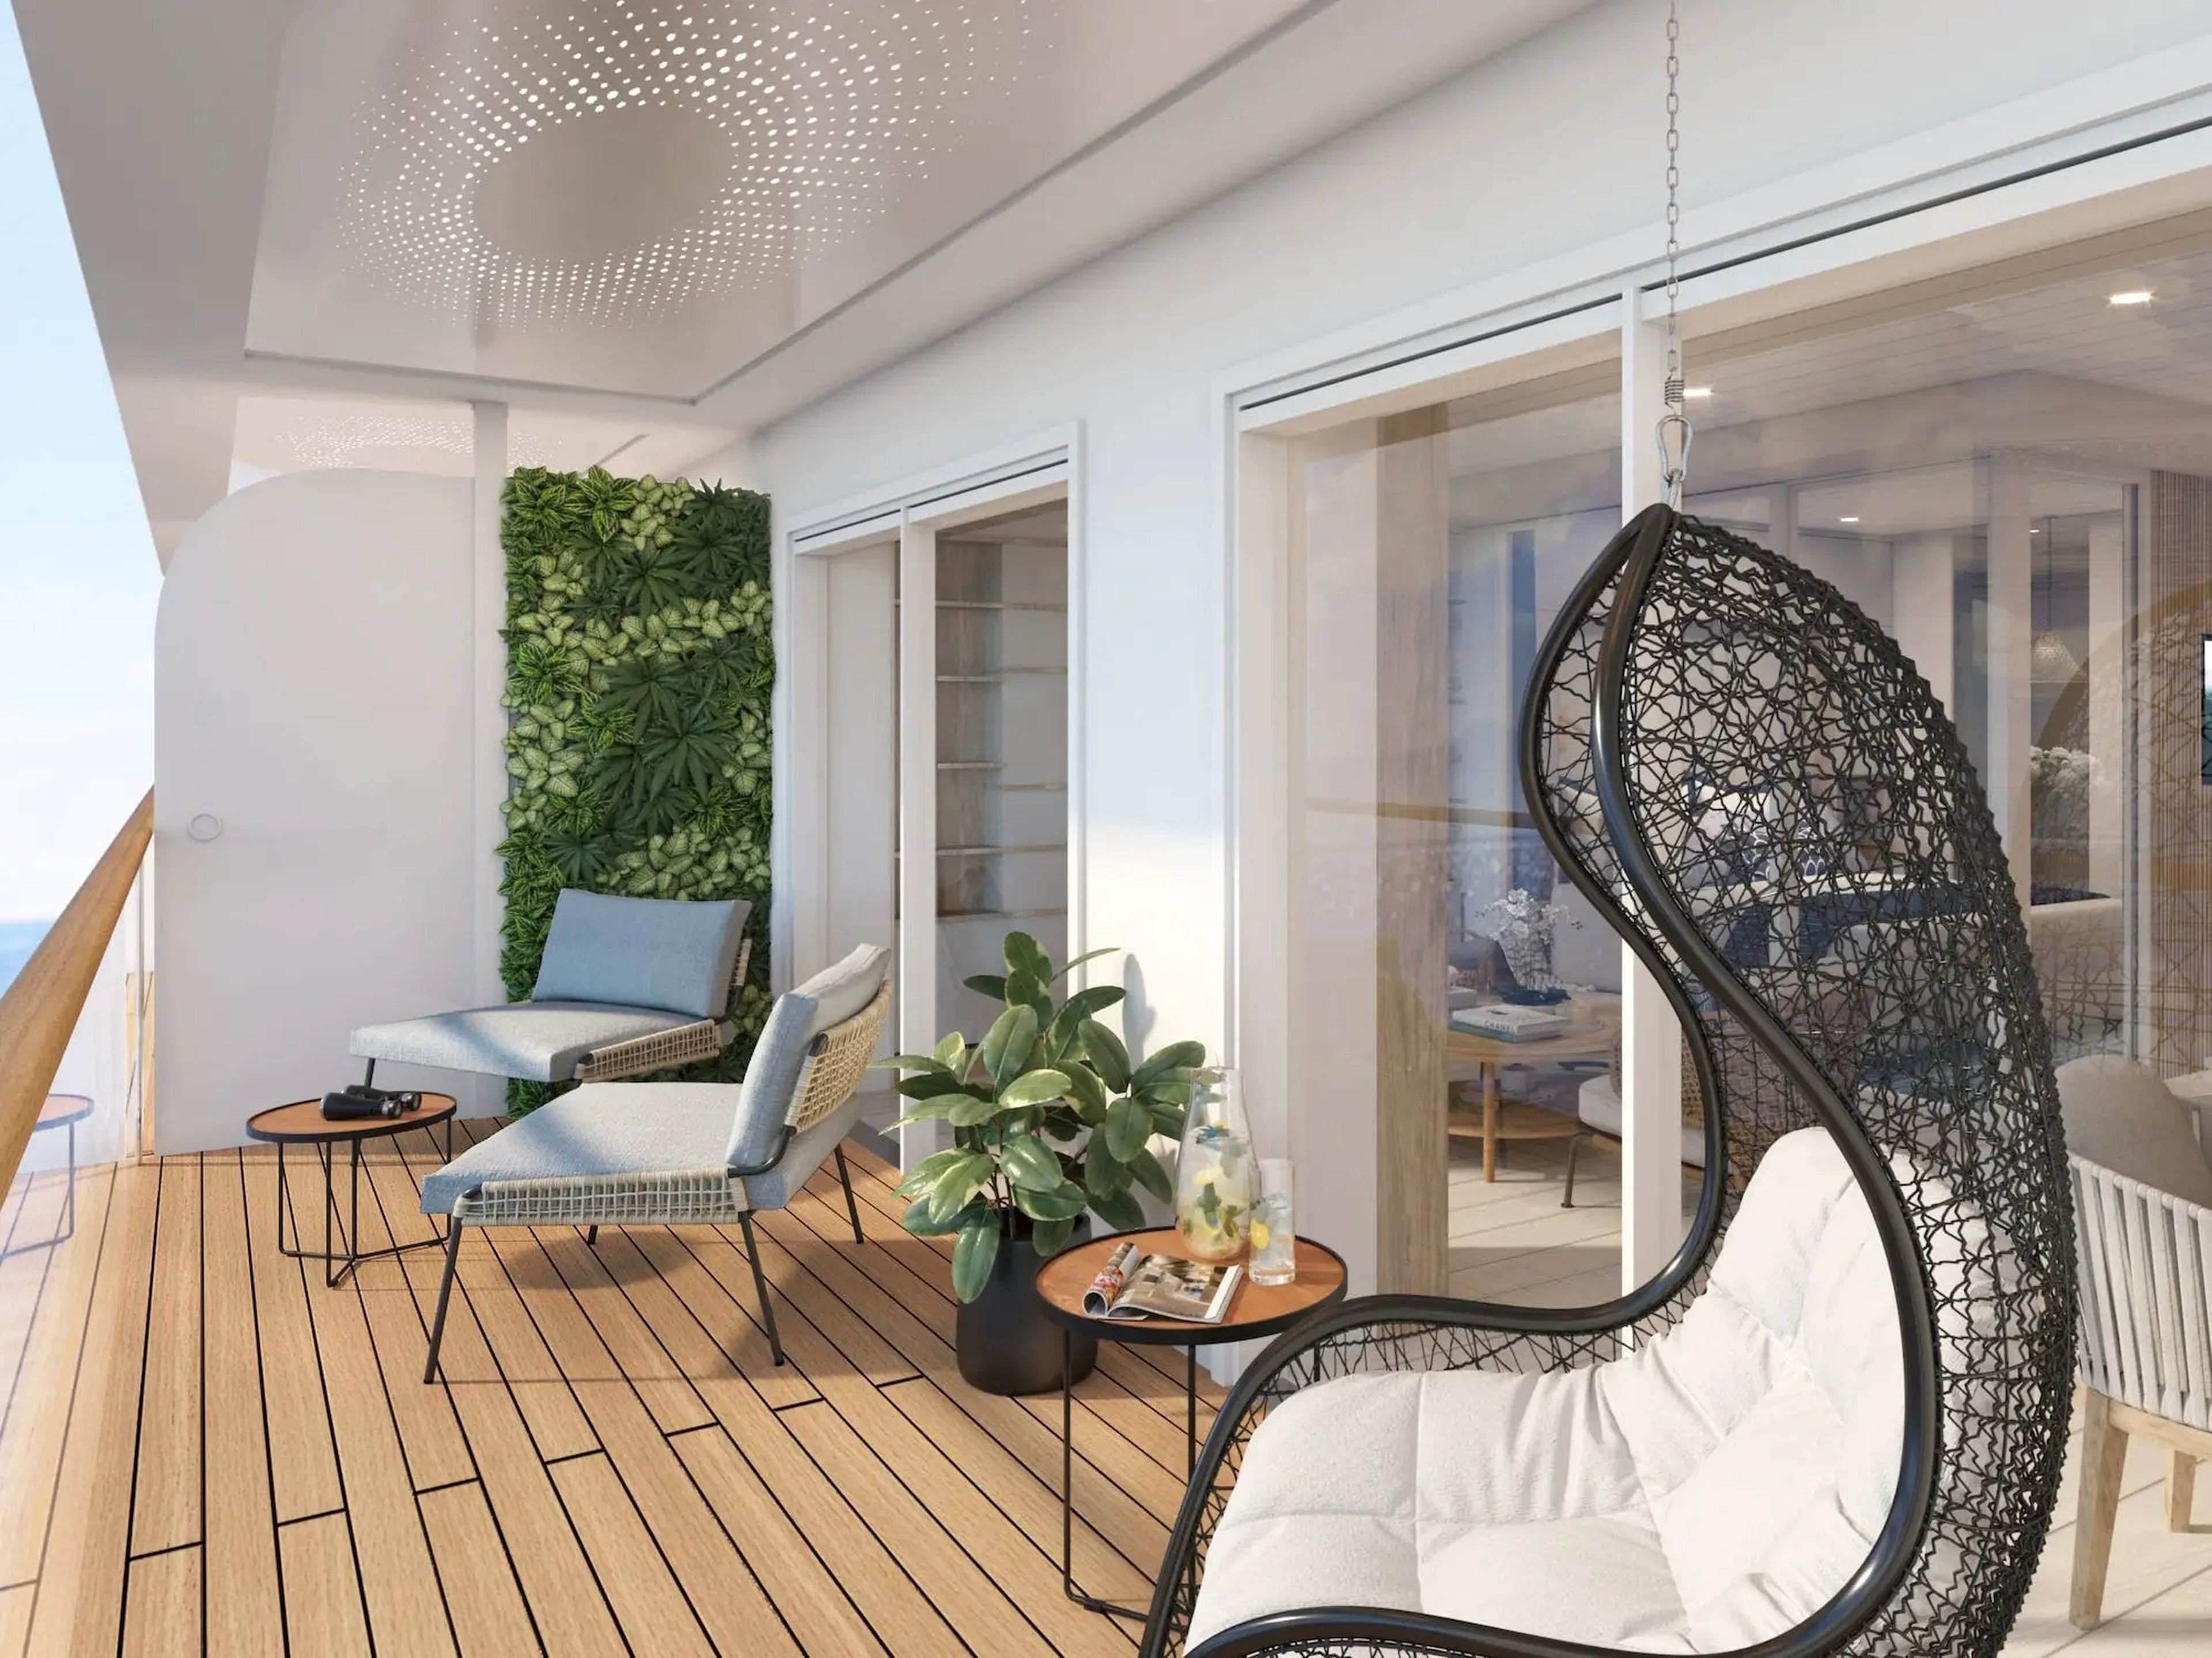 A rendering of the balcony in Storylines' MV Narrative cruise ship.